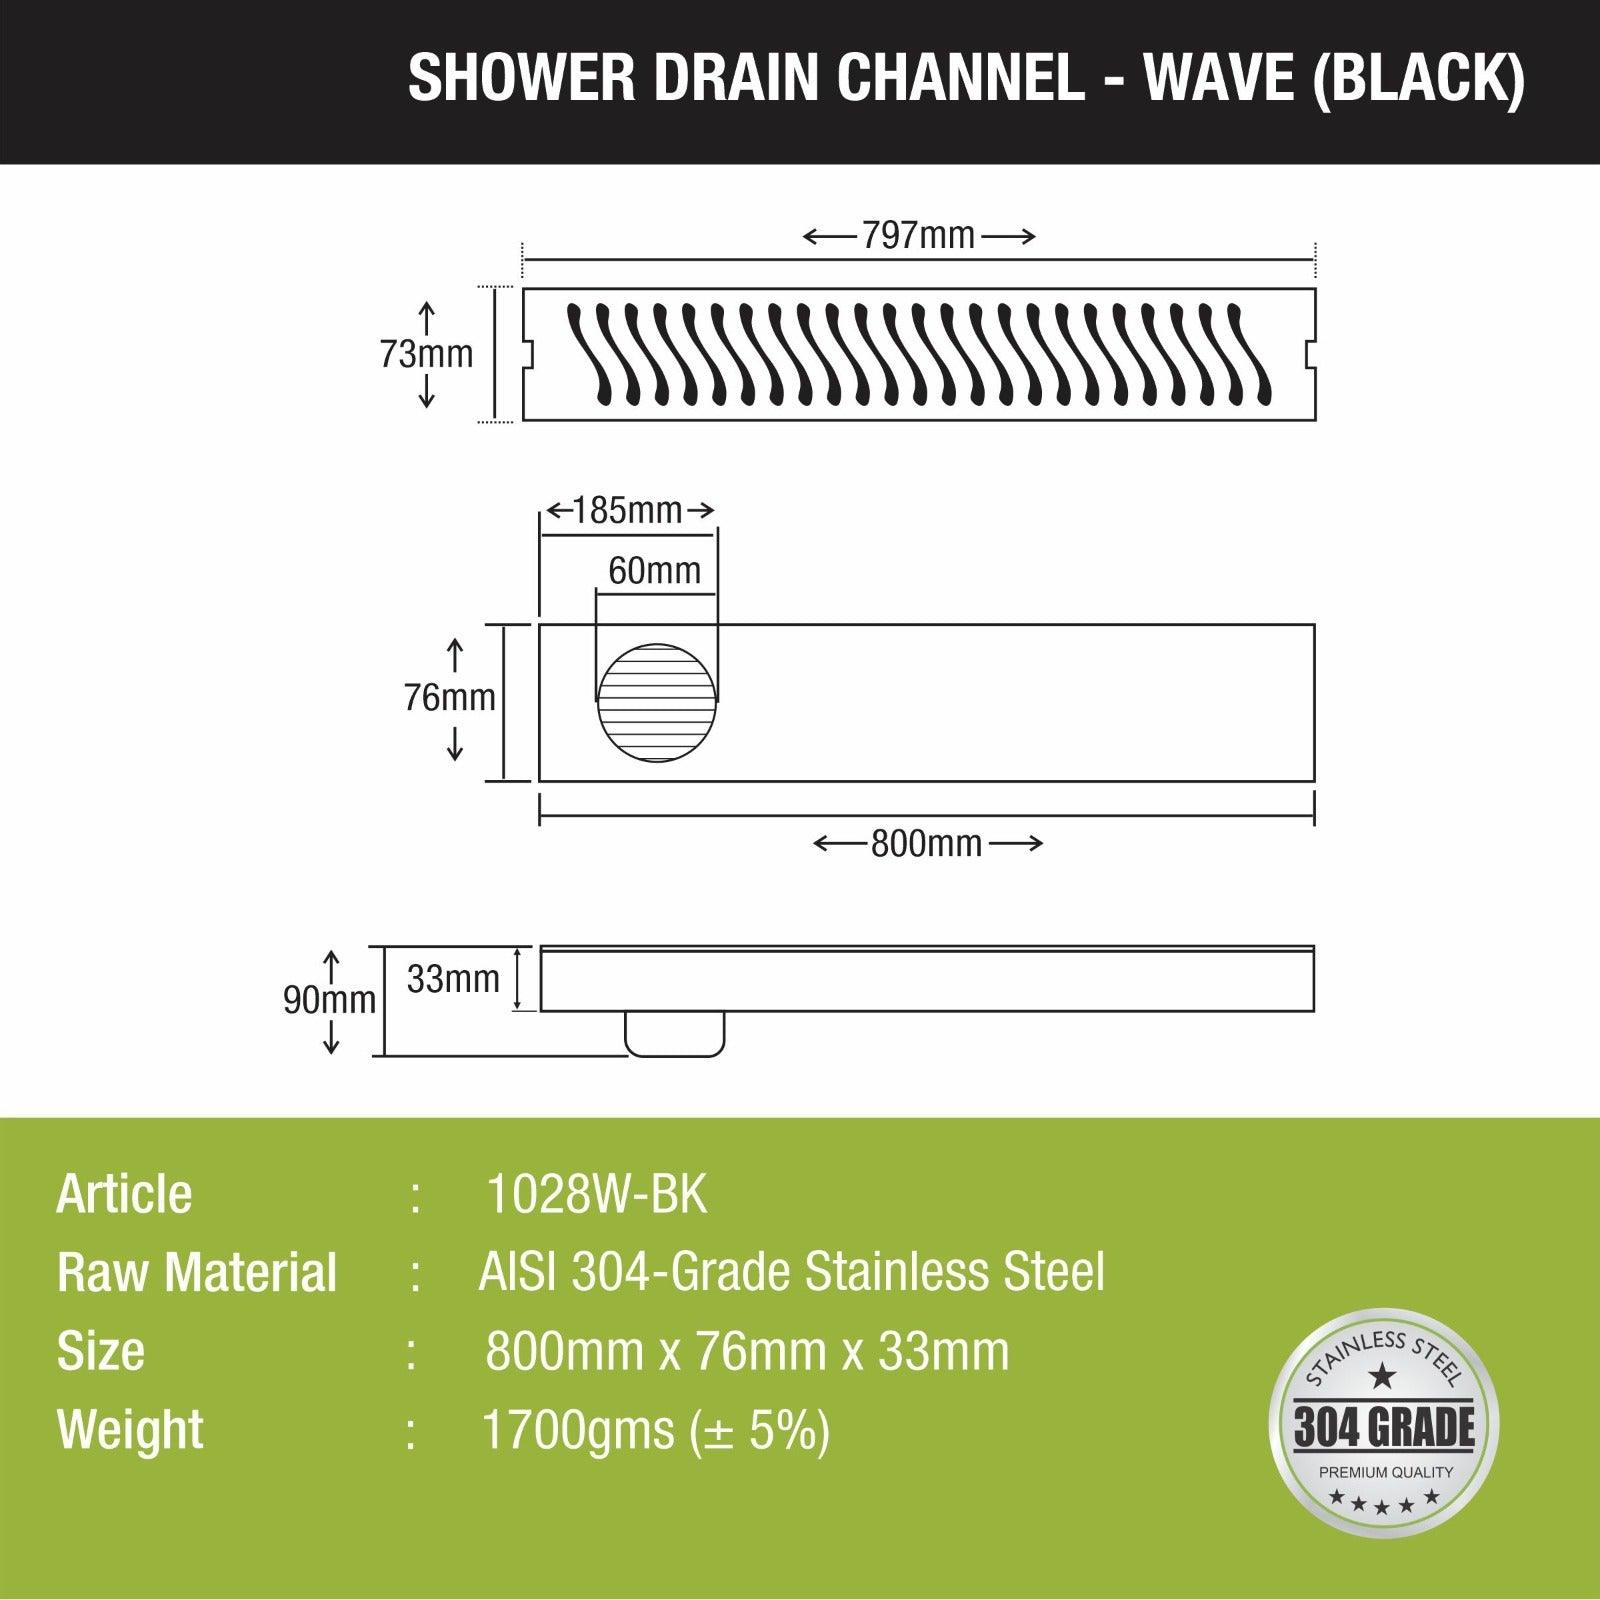 Wave Shower Drain Channel - Black (32 x 3 Inches) size and measurement